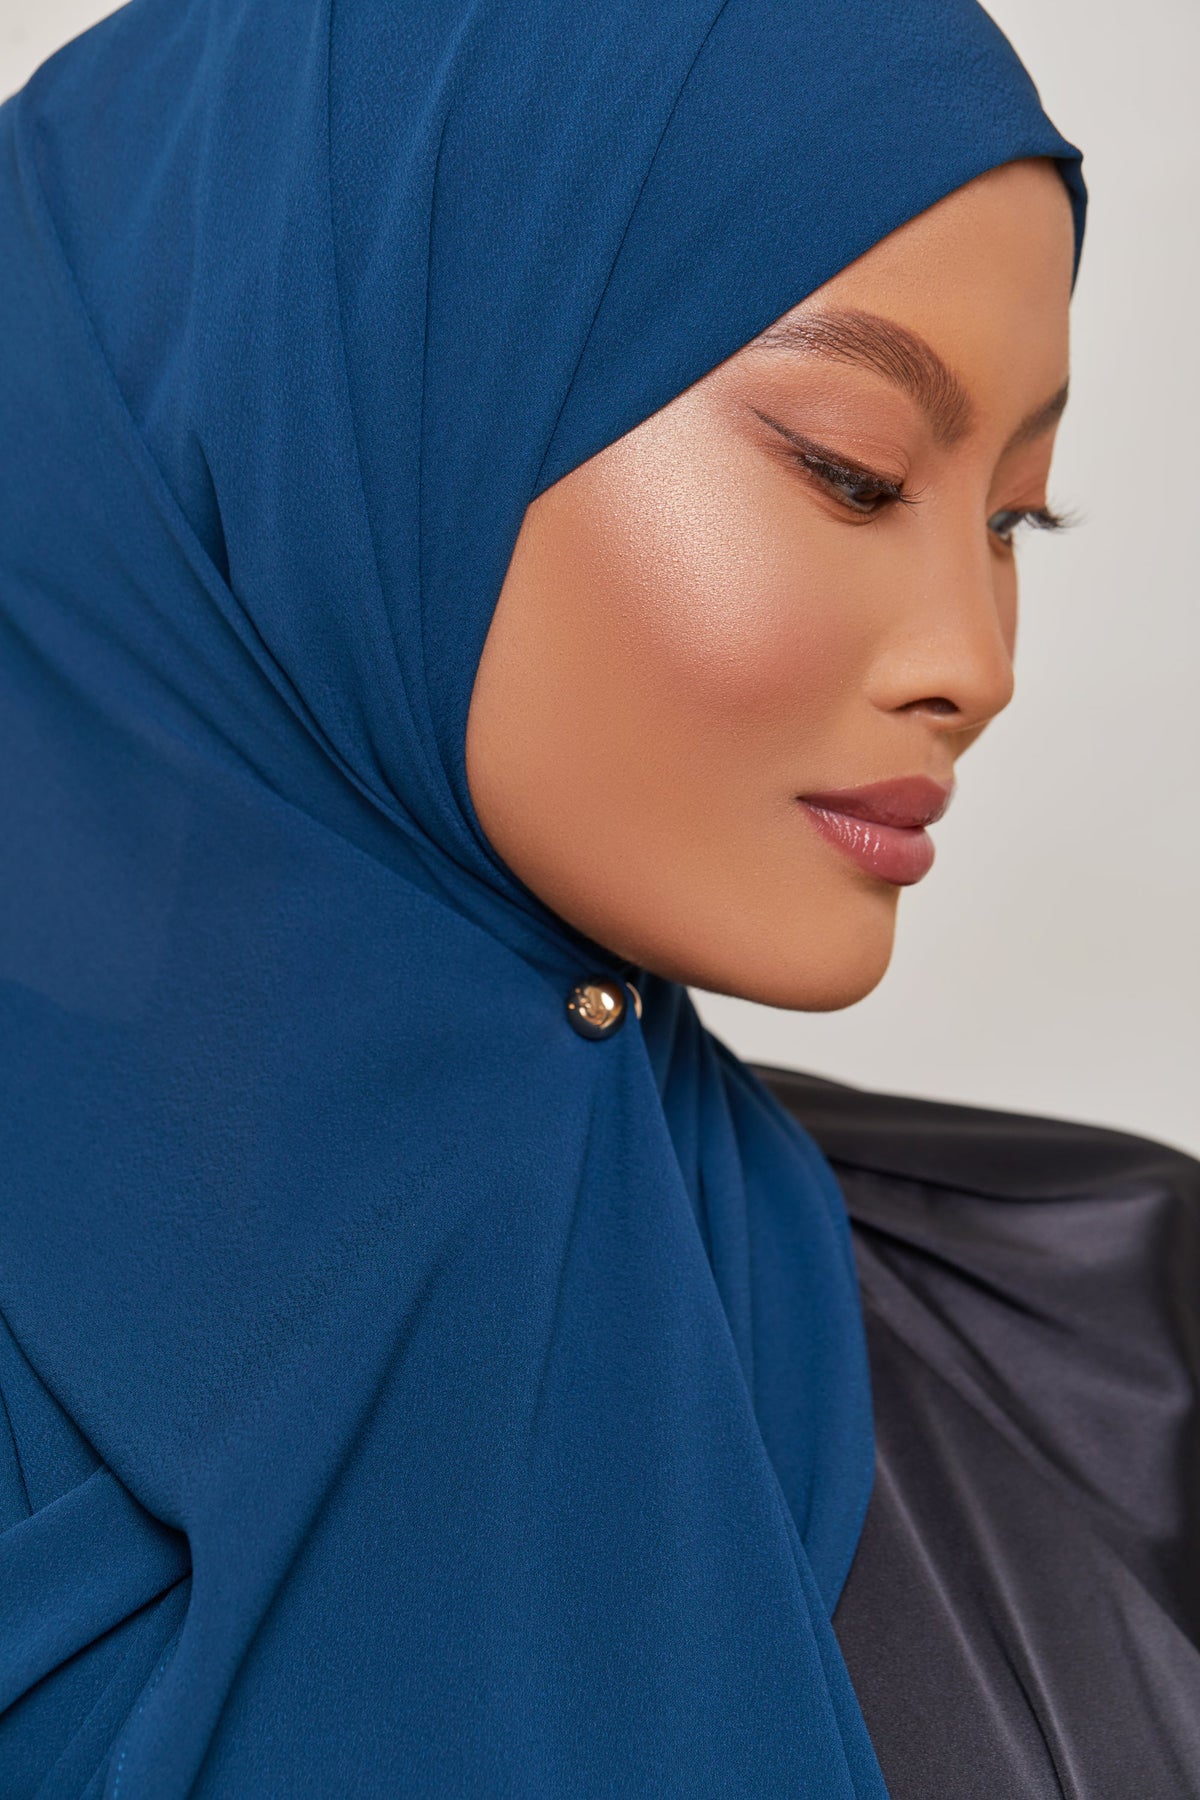 TEXTURE Everyday Chiffon Hijab - Outerspace epschoolboard 